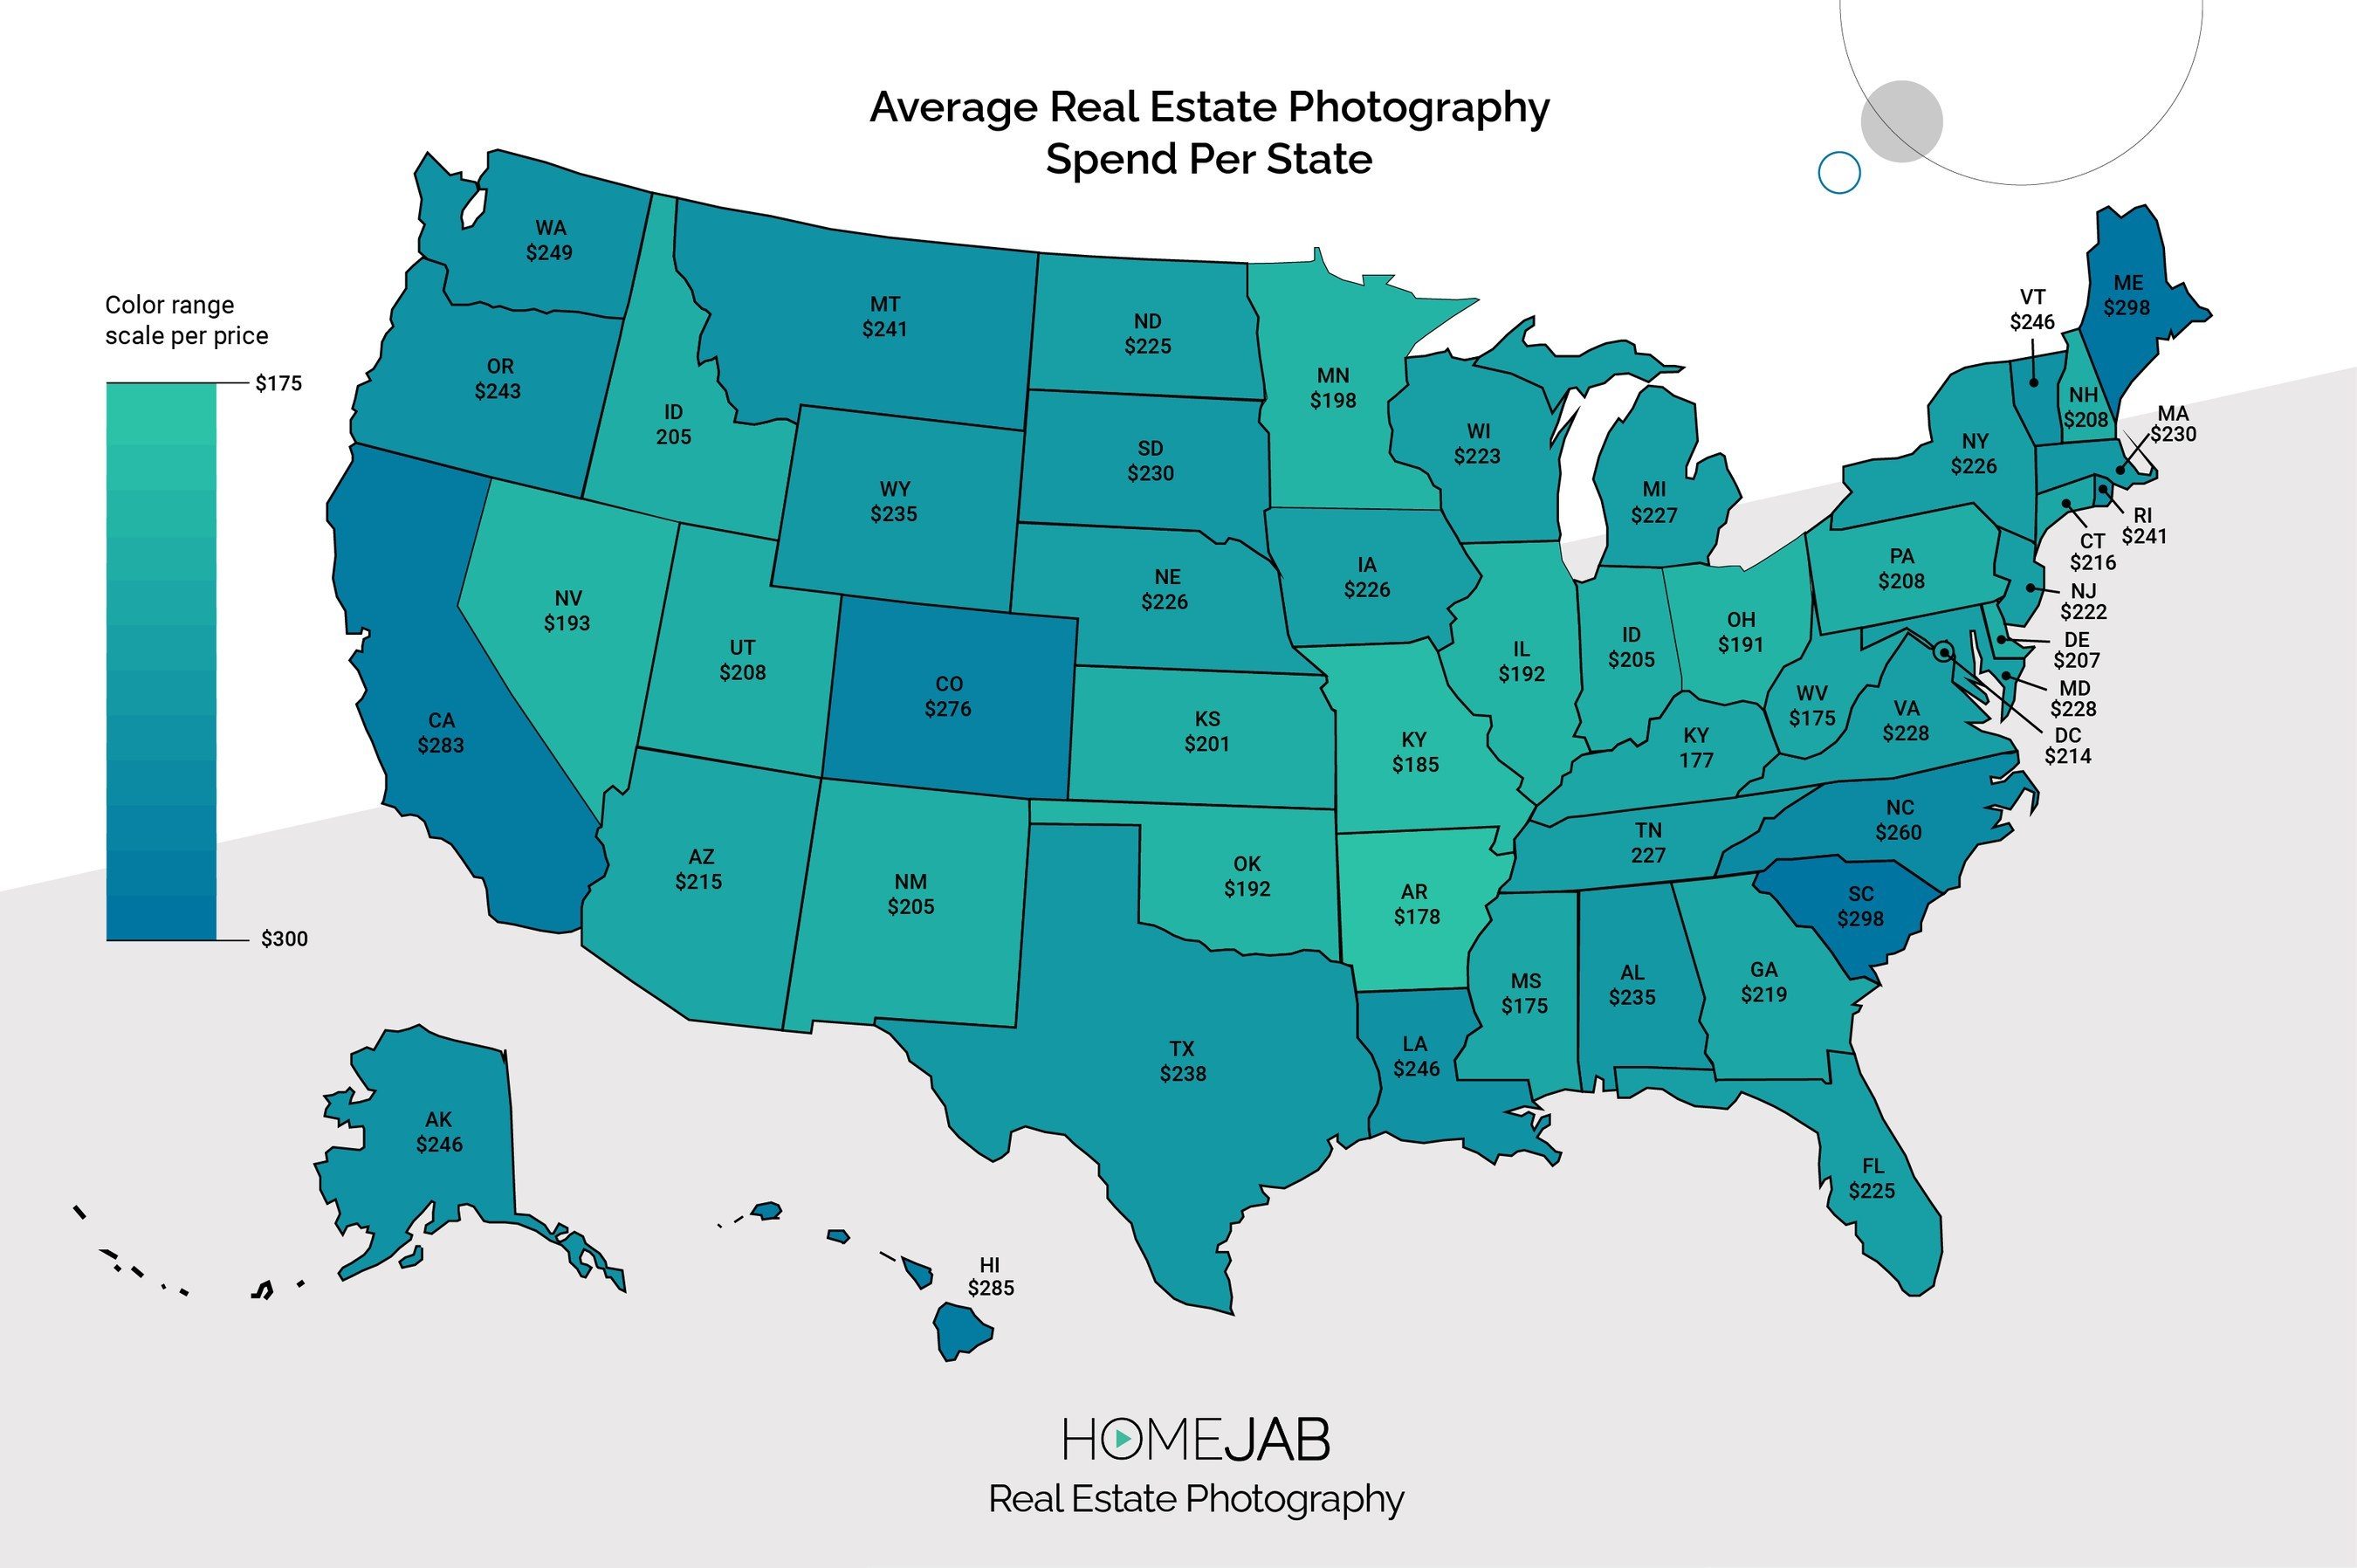 A map of the U.S. on a gradient color scale showing the average amount of money real estate professionals spend on photography.